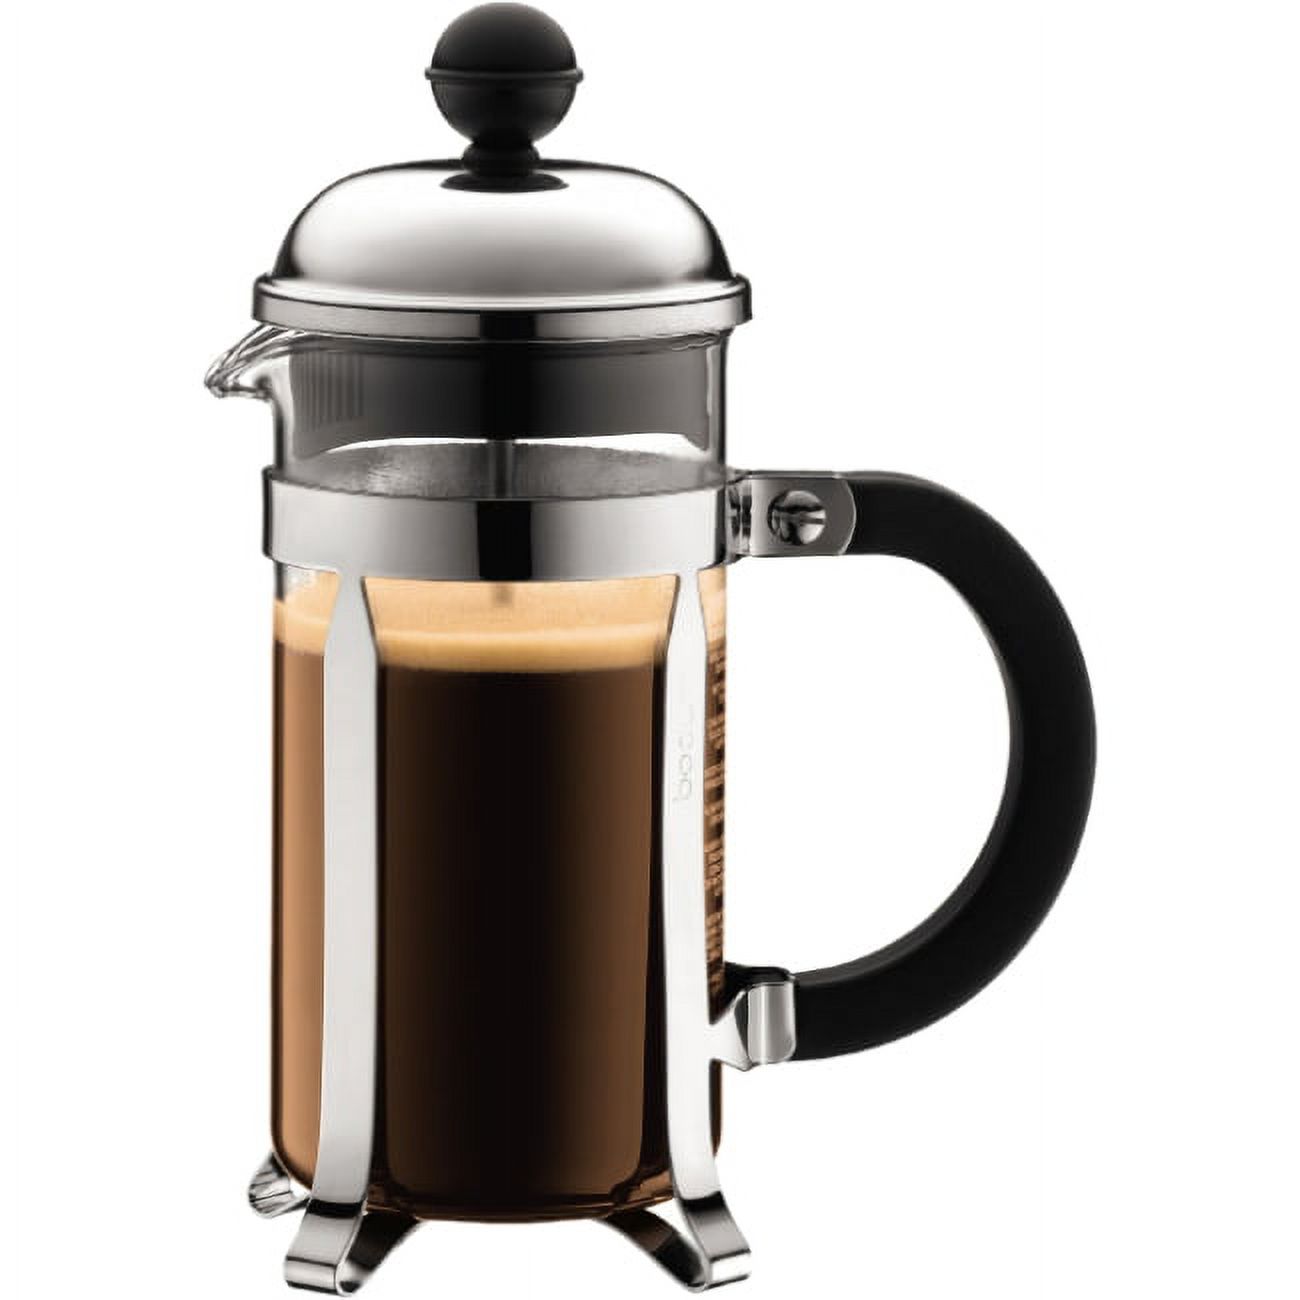 BODUM Chambord French Press Coffee Maker, 12 Ounce, Stainless Steel - image 3 of 7